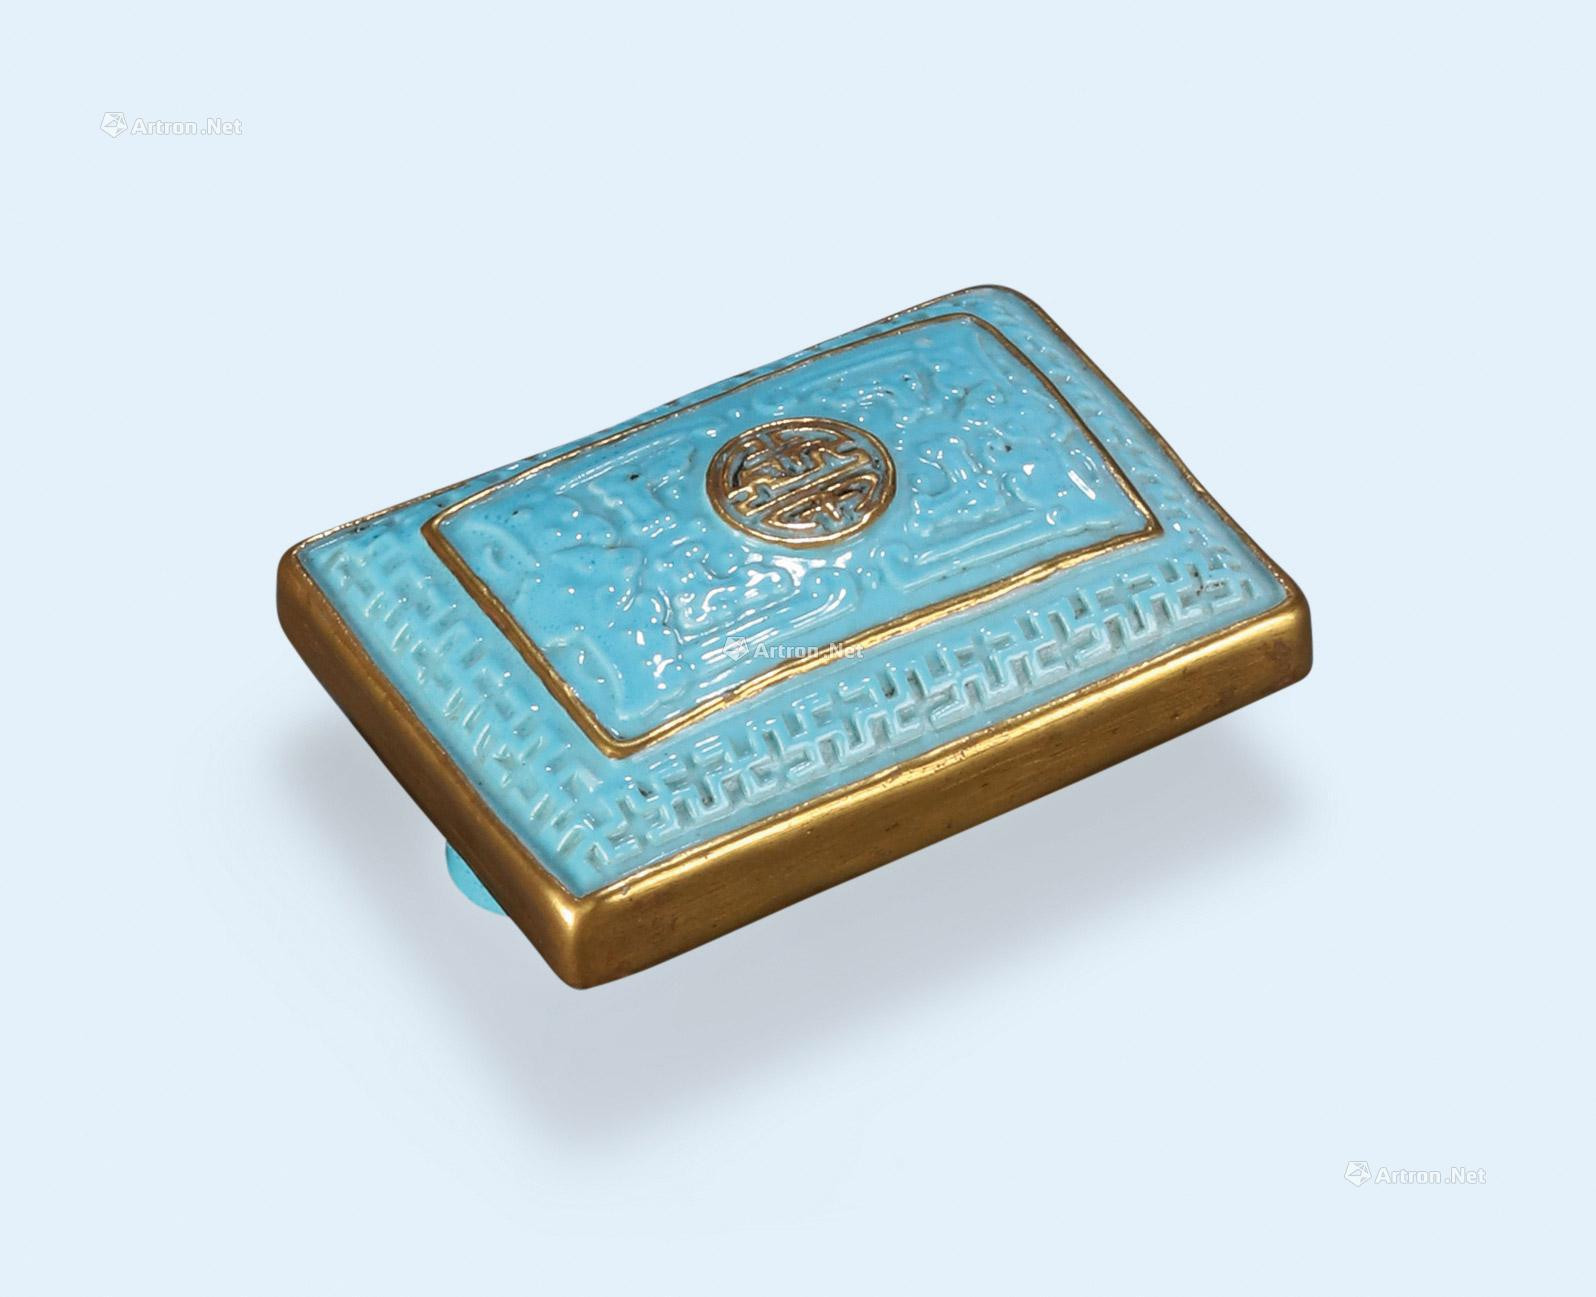 A TURQUOISE-GLAZED BUCKLE WITH BAT AND LONGEVITY DESIGN